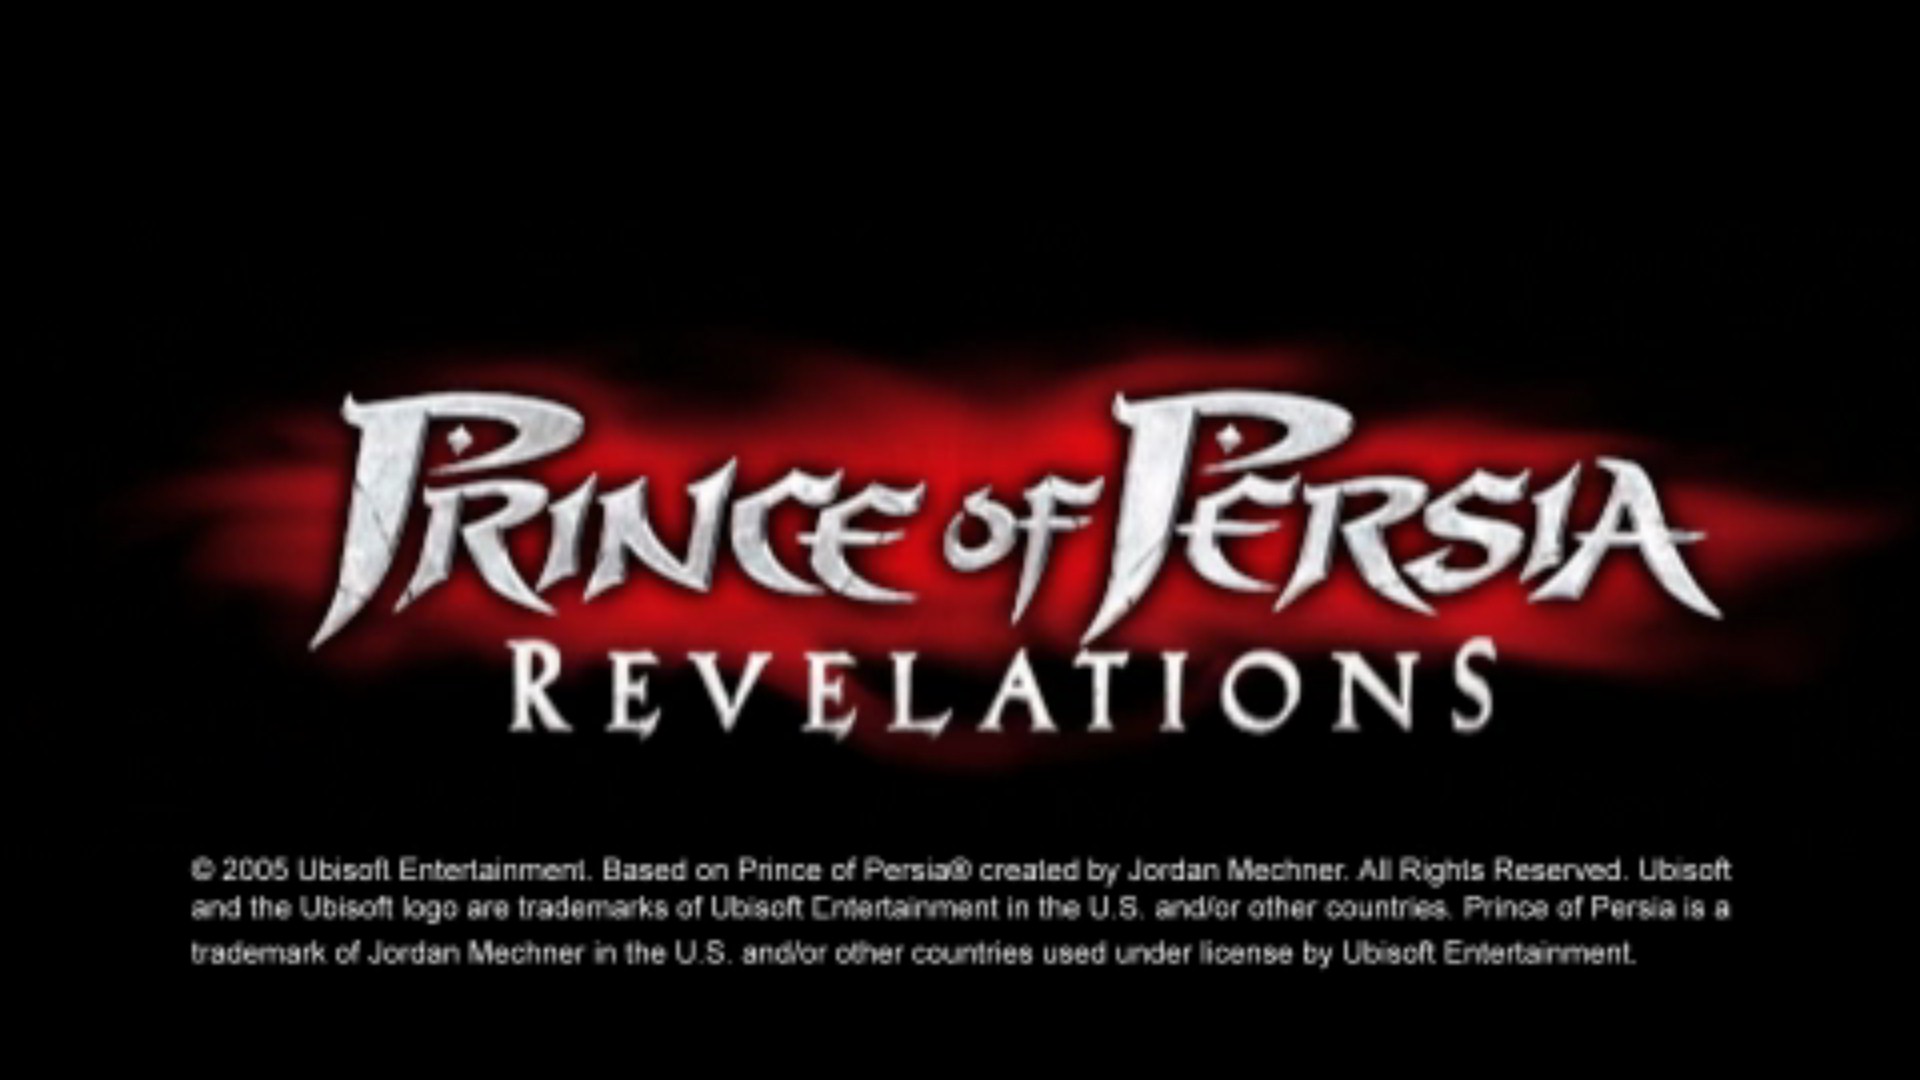 Prince of Persia: Revelations PSP ISO file